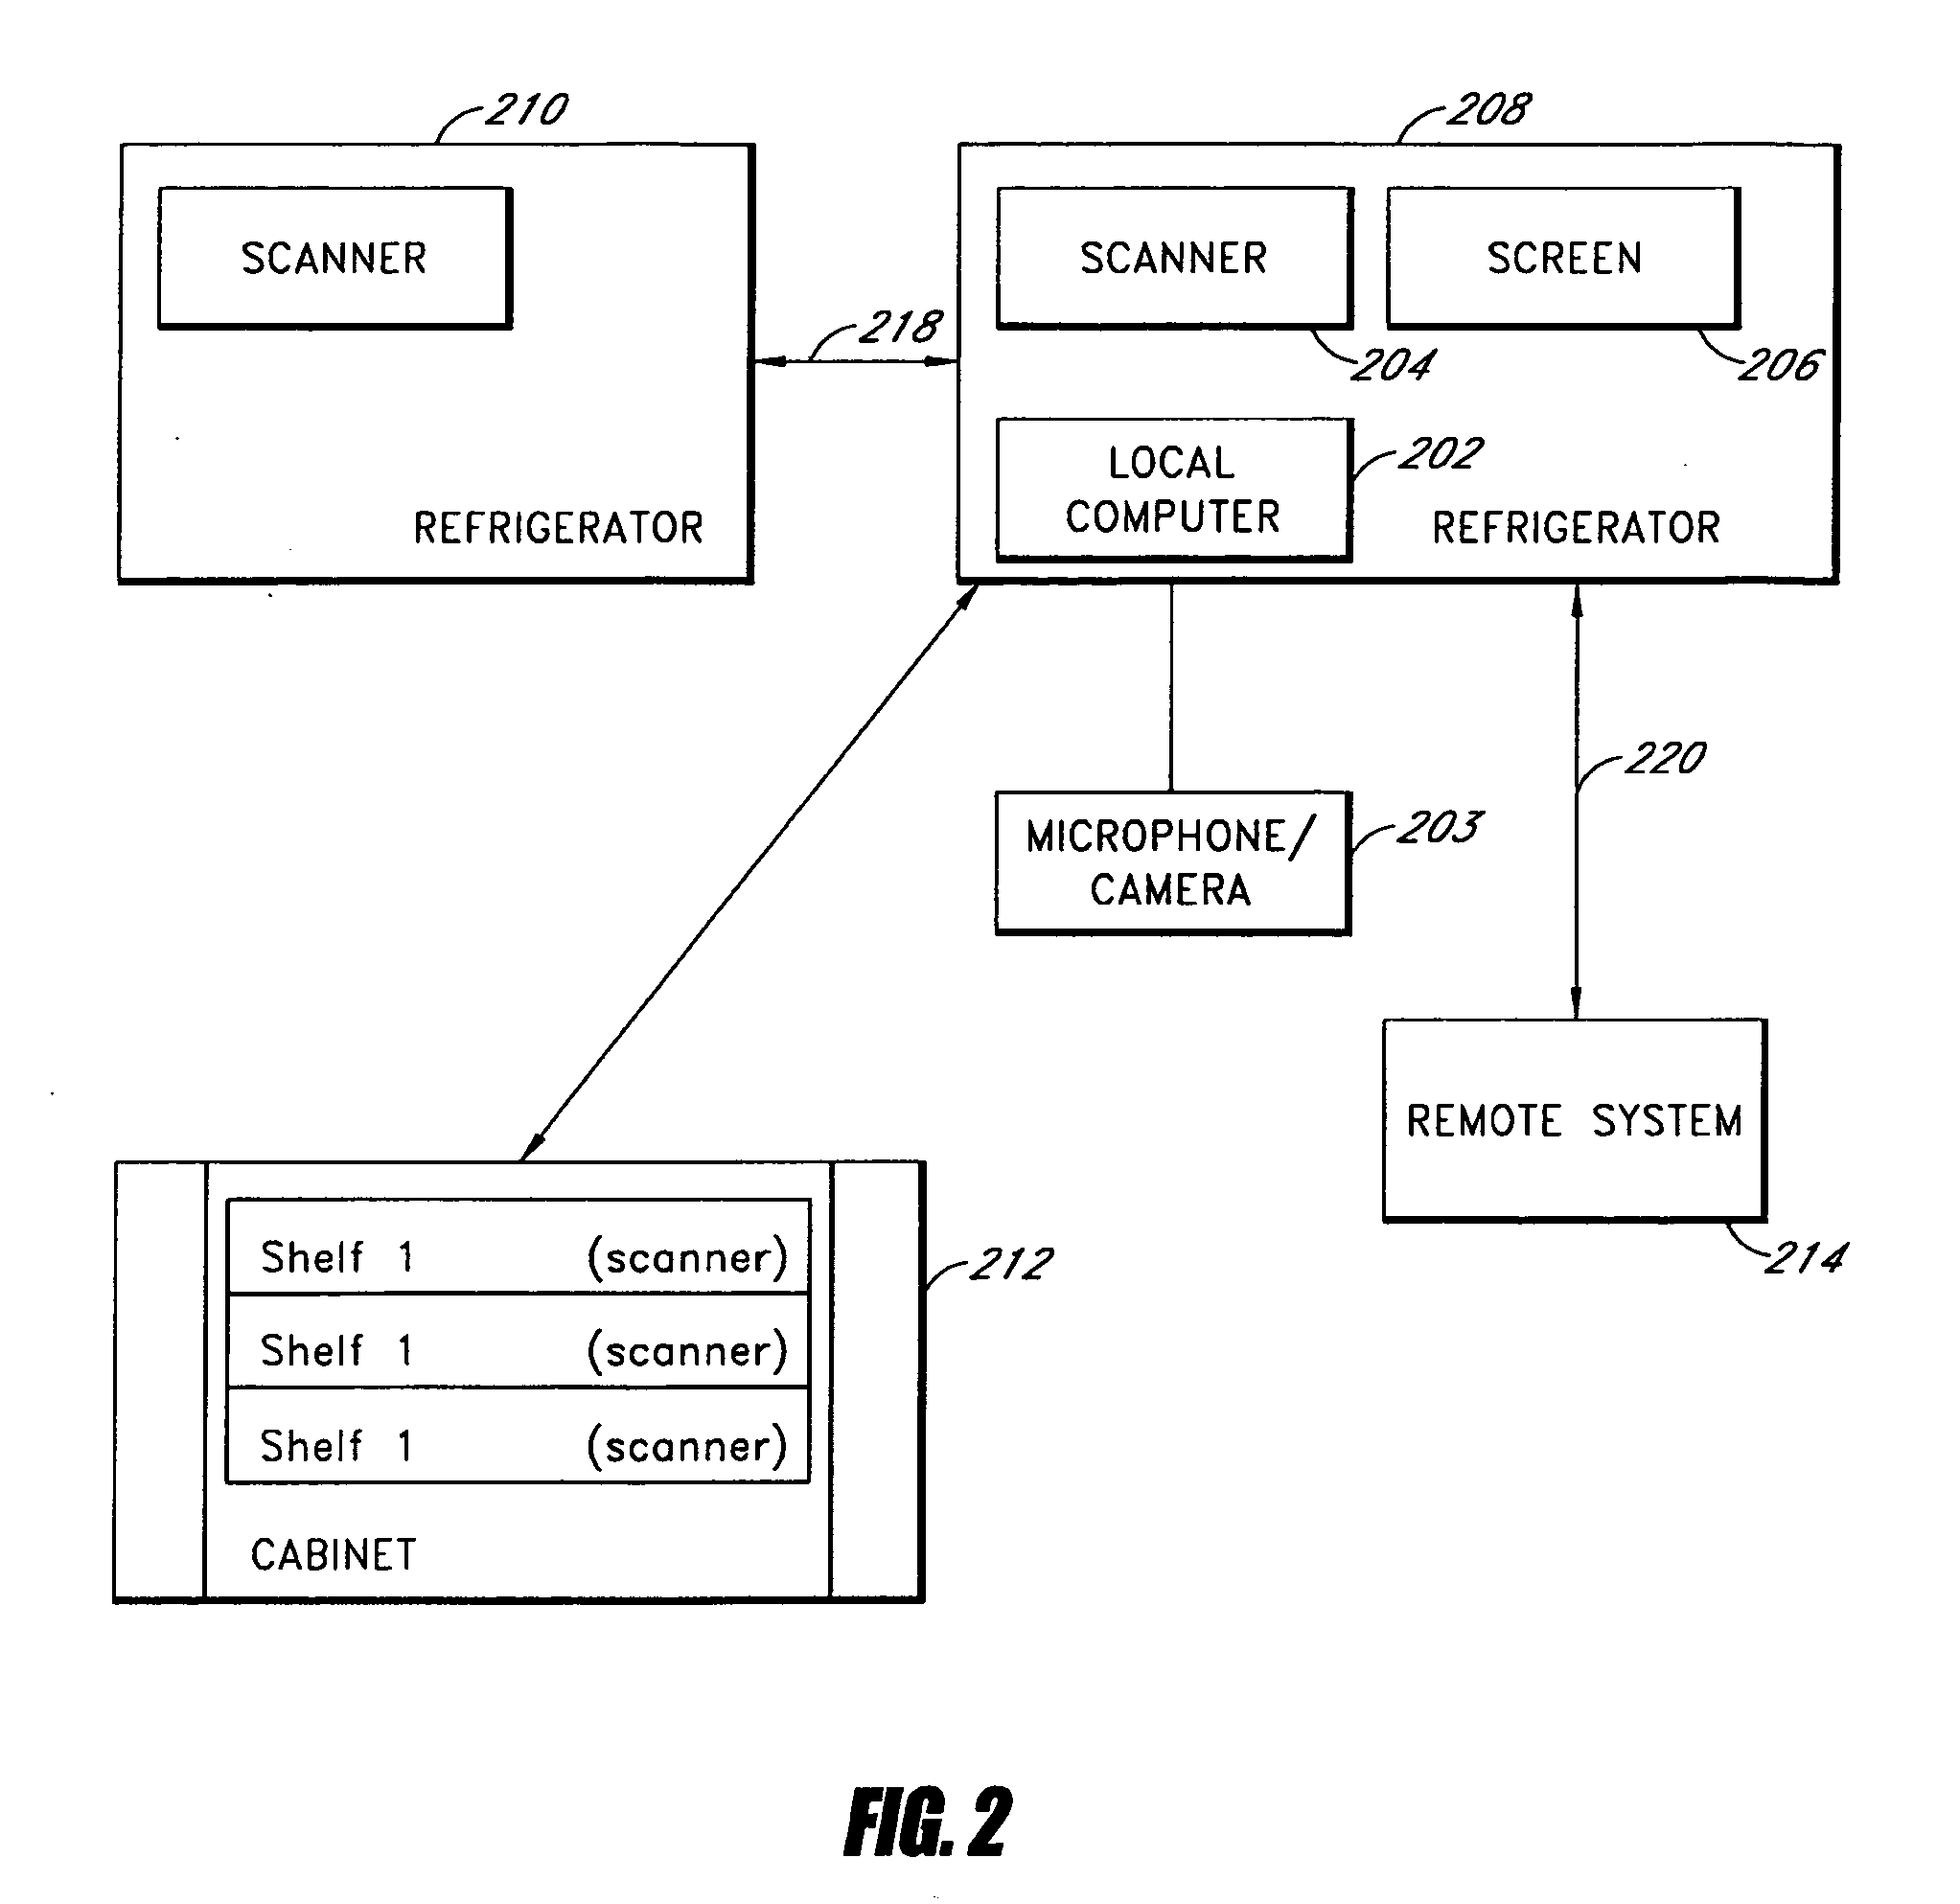 Systems and methods for scanning information from storage area contents